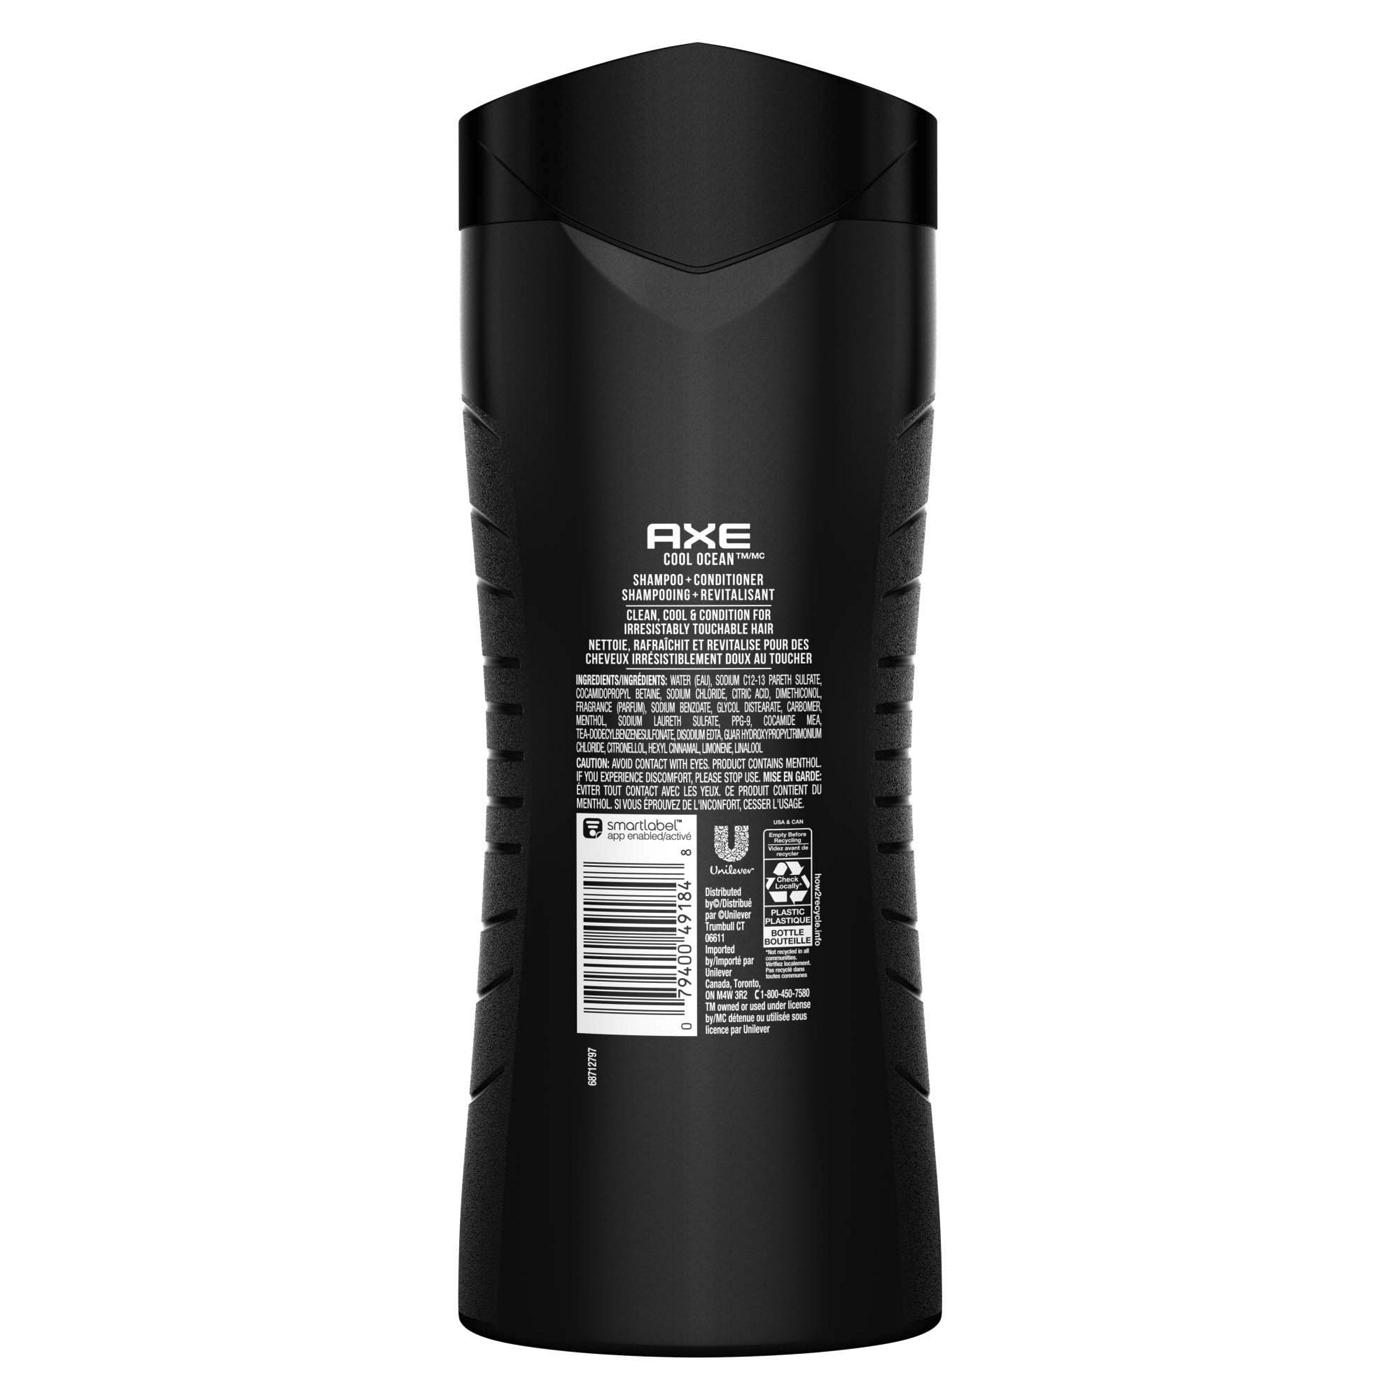 AXE Hair 2 in 1 Shampoo + Conditioner - Cool Ocean; image 6 of 7